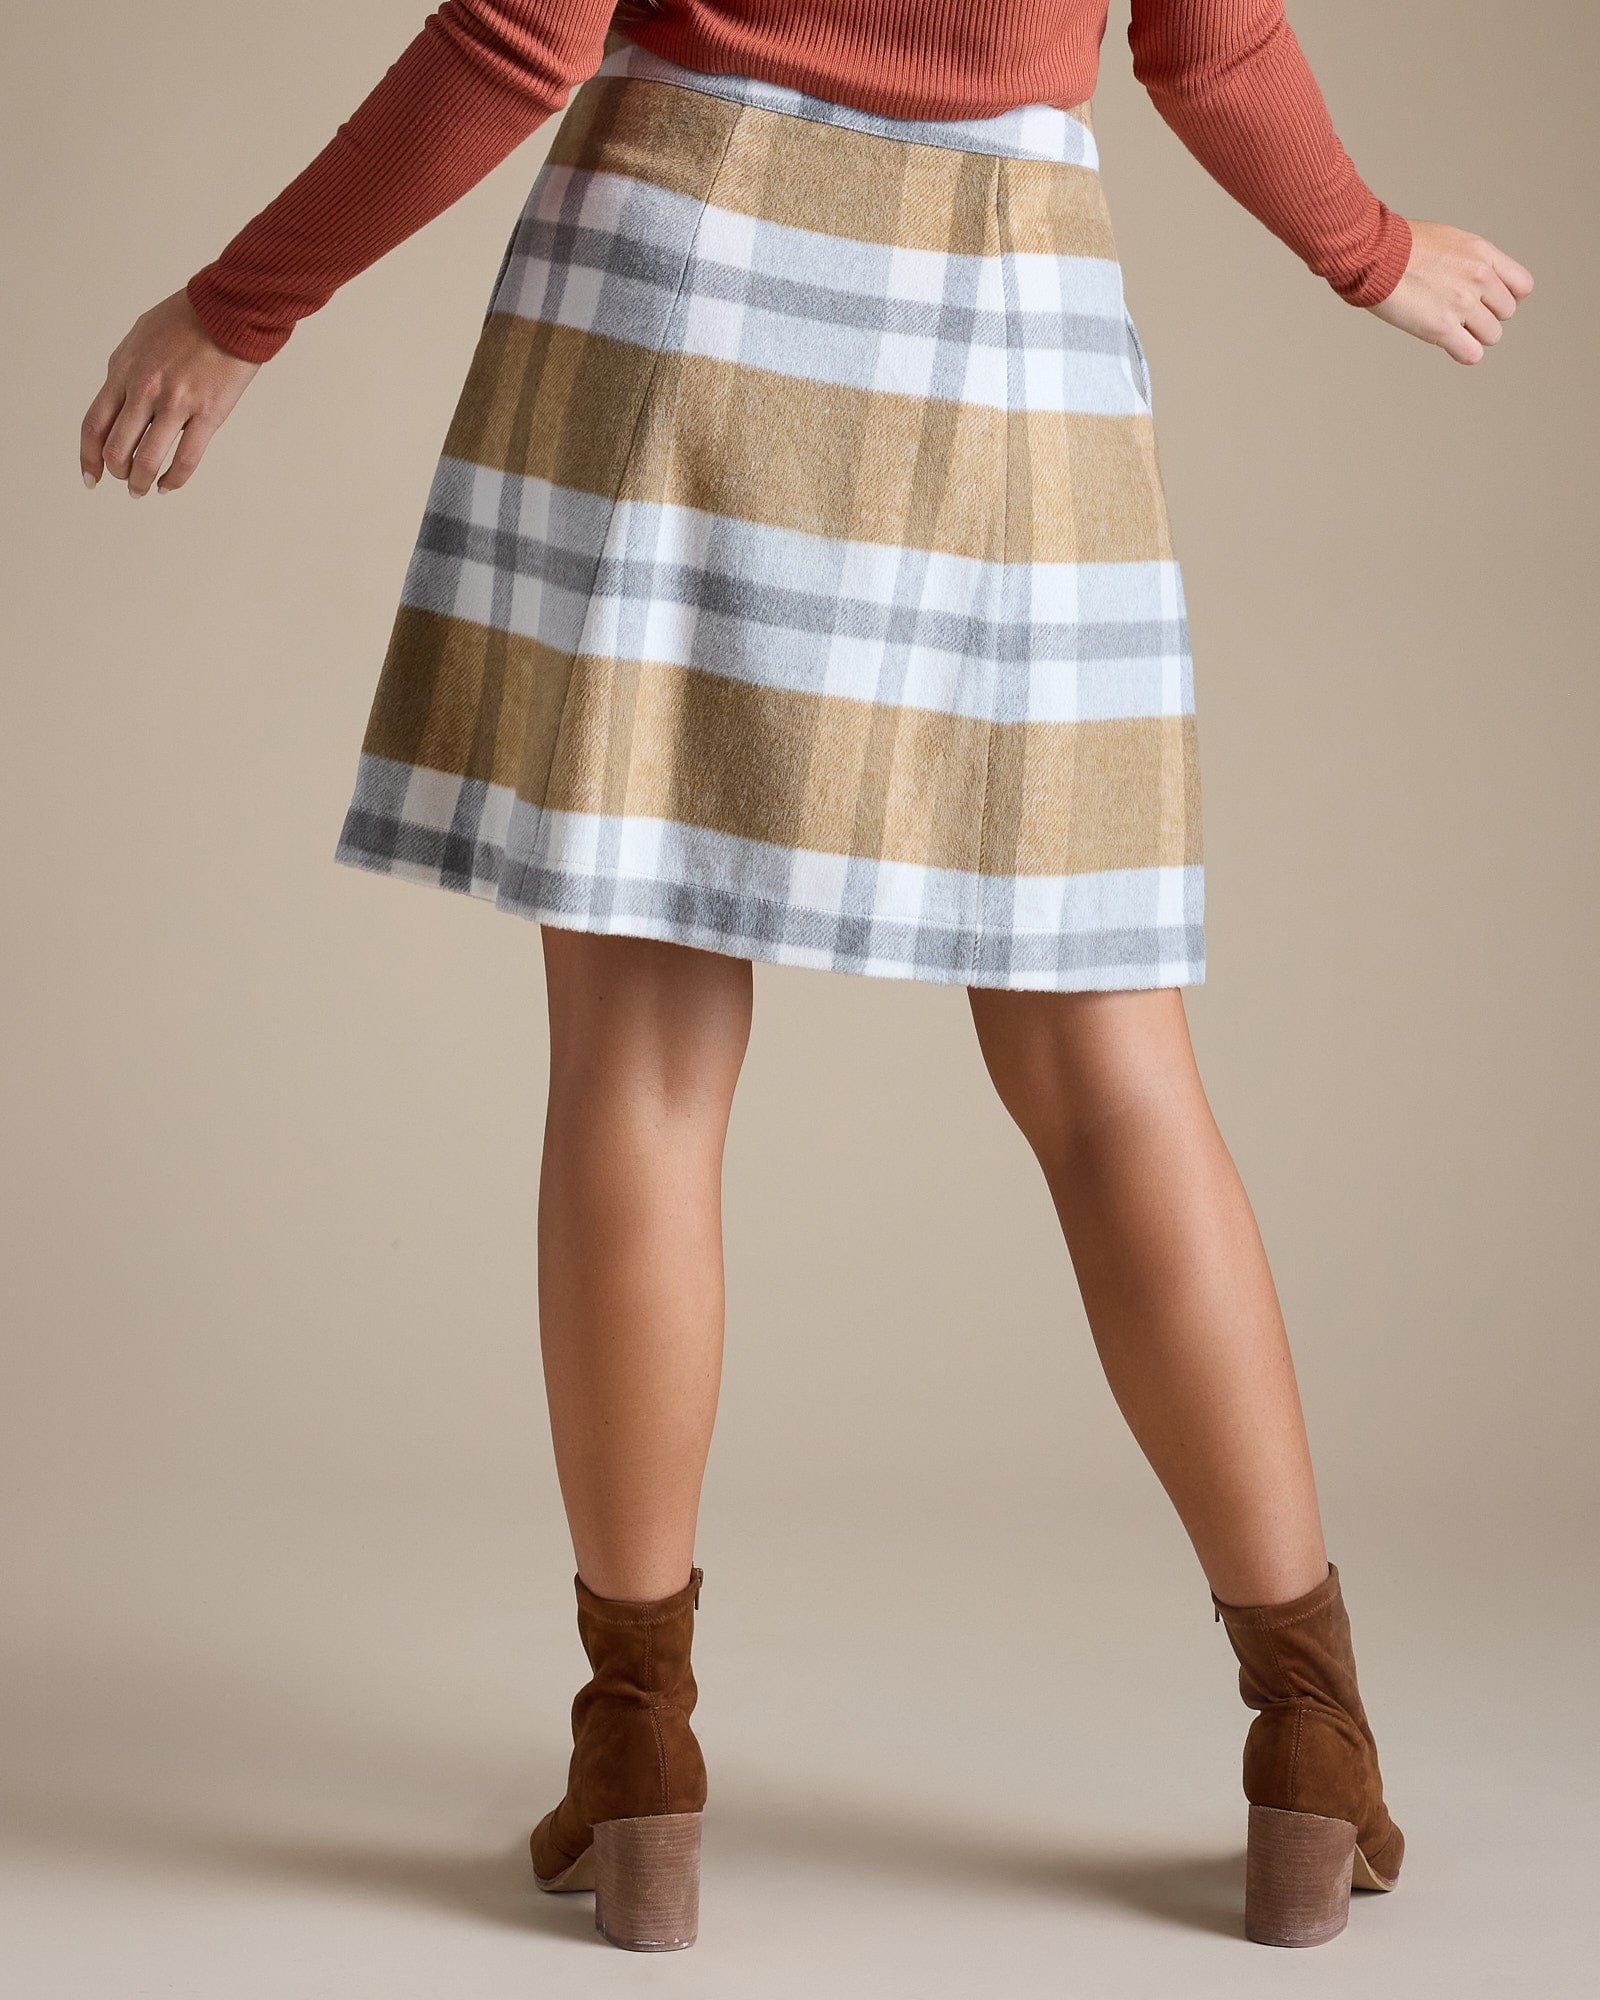 Woman in striped, knee-length, button-down skirt